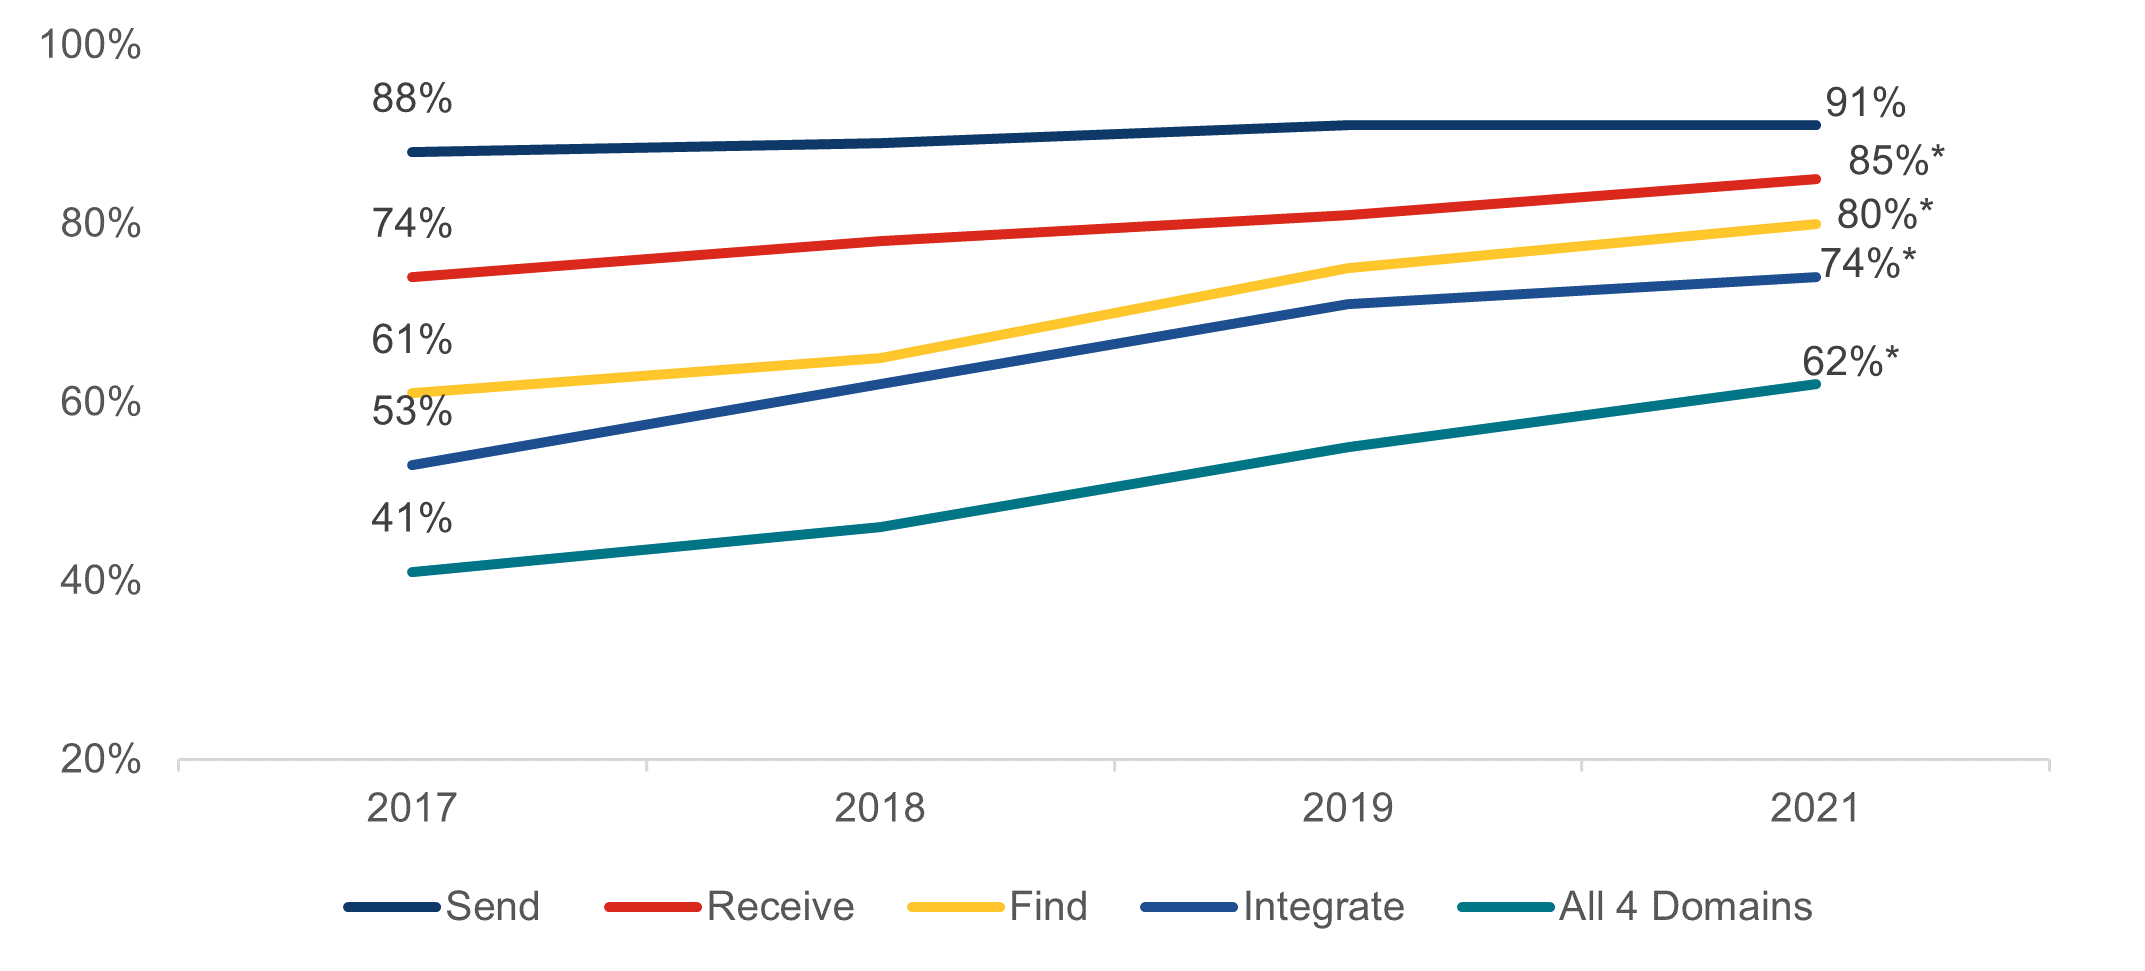 Figure 1 shows trends in five interoperability domains (send, receive, find, integrate, and all four domains) between 2017 and 2021 as trending lines. In 2017, 88%, 74%, 61%, 53%, and 41% of hospitals sent, received, found, integrated information, and engaged in all four domains, respectively. In 2021, 91%, 85%, 80%, 74%, and 62% of hospitals sent, received, found, integrated information, and engaged in all four domains, respectively. The change between 2017 and 2021 was statistically significant across all domains. 